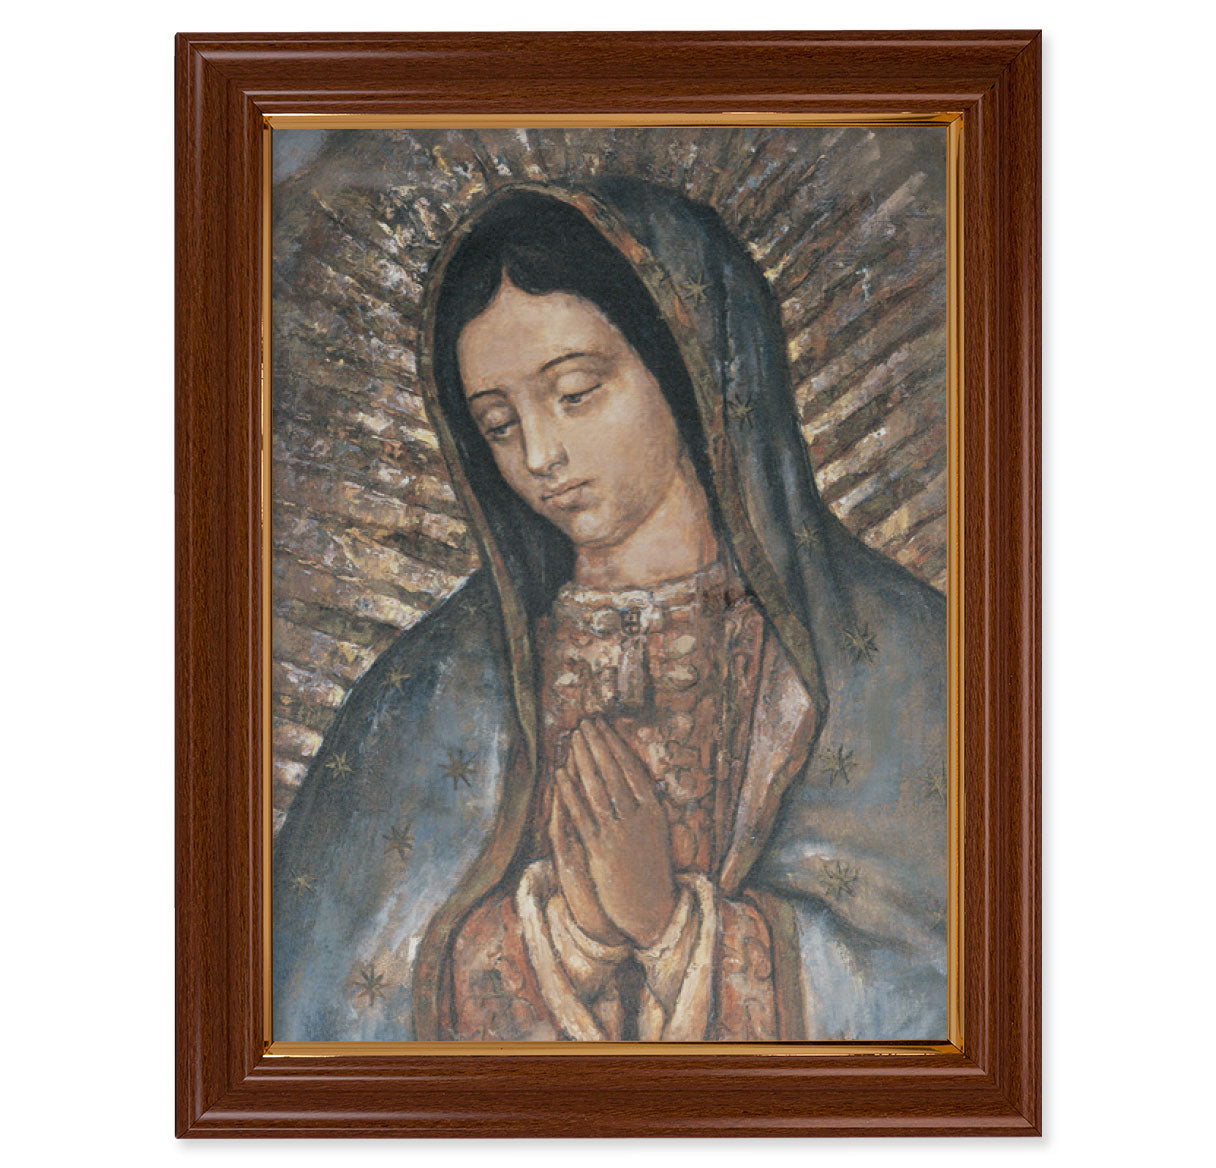 Our Lady of Guadalupe Walnut Finish Framed Canvas Art